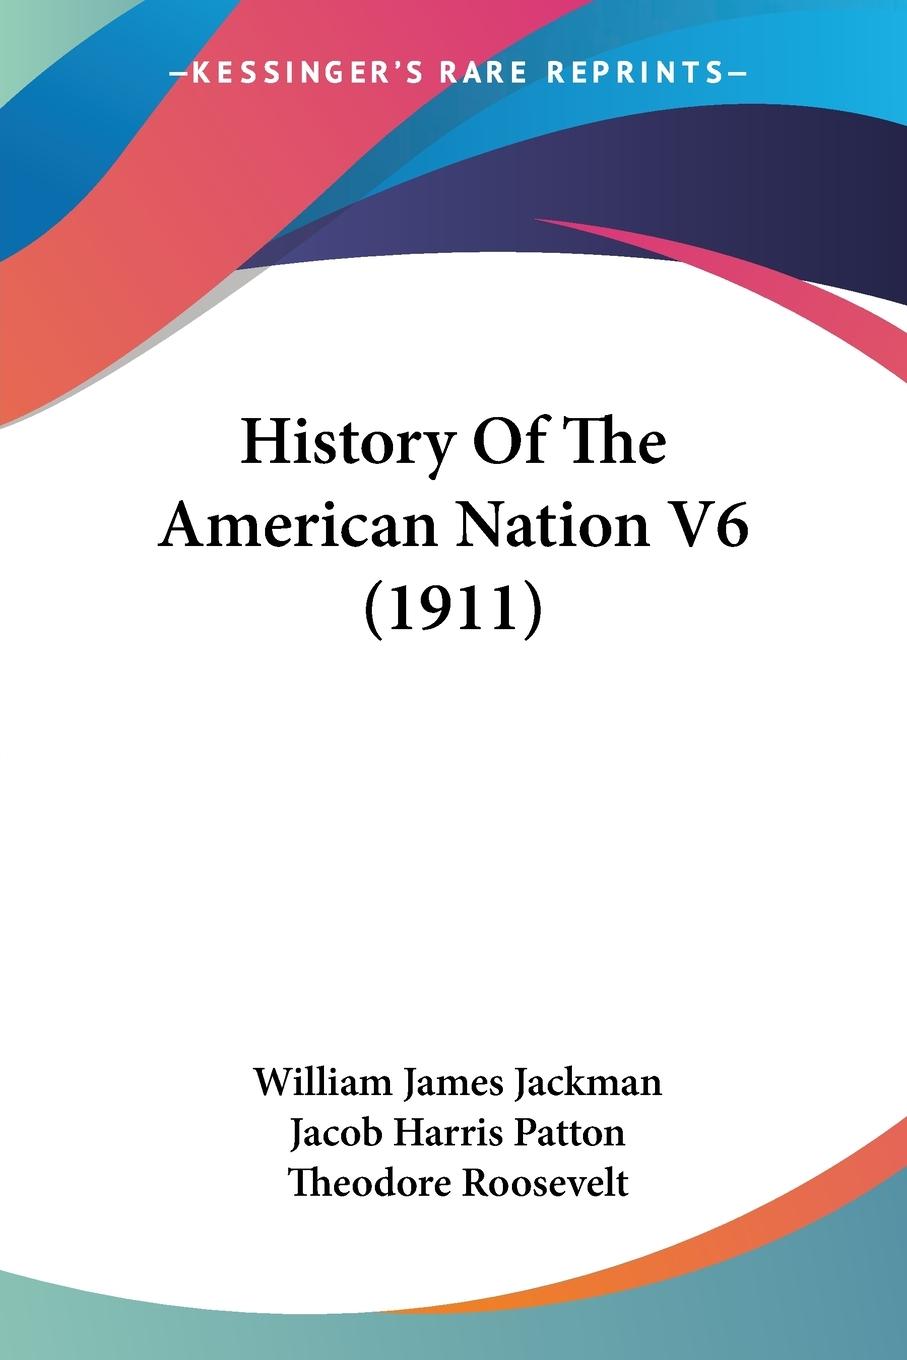 History Of The American Nation V6 (1911) - Jackman, William James Patton, Jacob Harris Roosevelt, Theodore